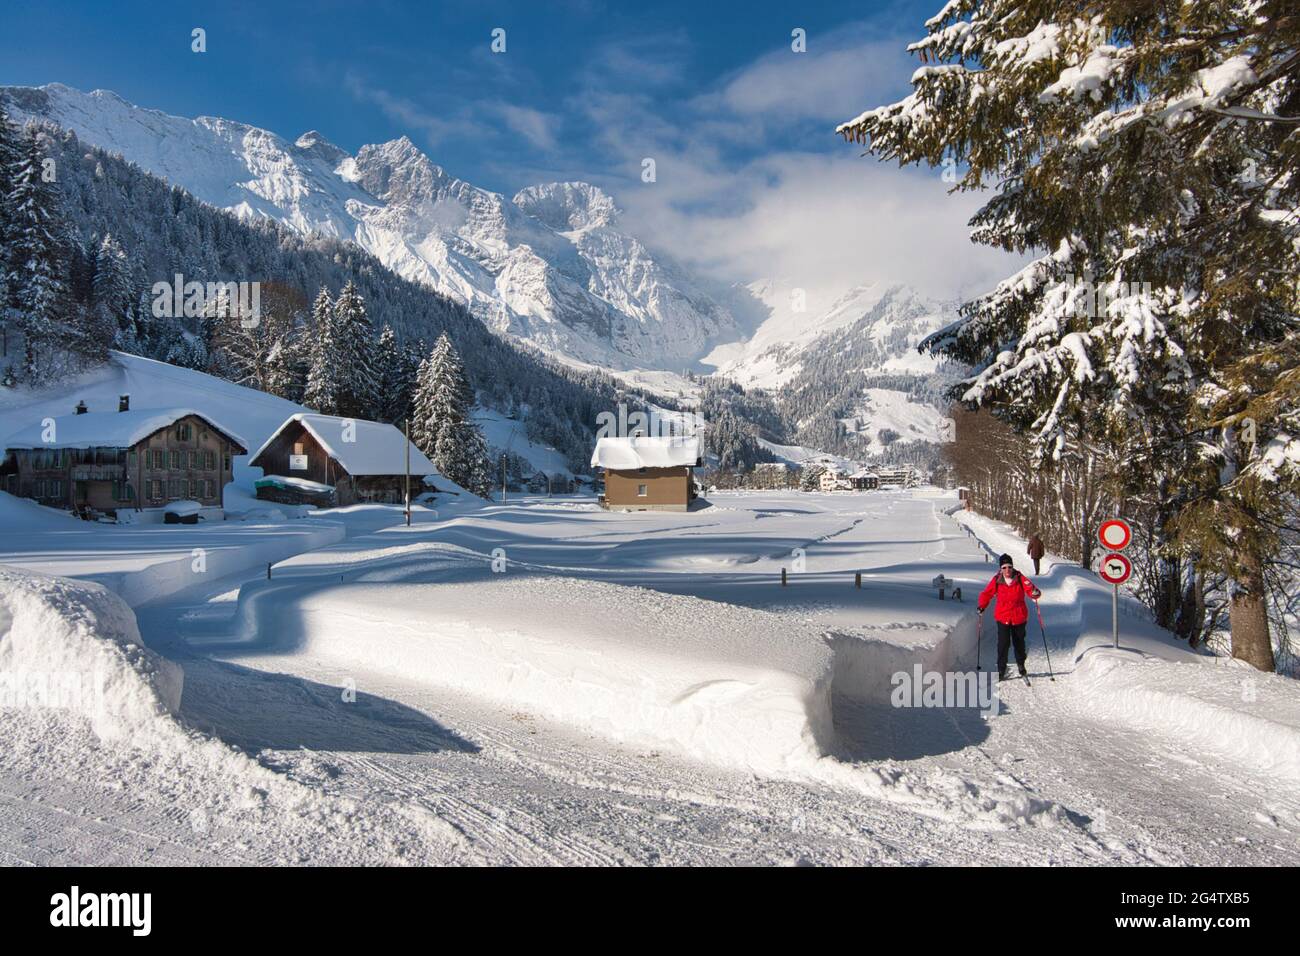 A landscape of a sunlit snow covered field with mountain backdrop at Engelberg, Obwalden canton, central Switzerland Stock Photo